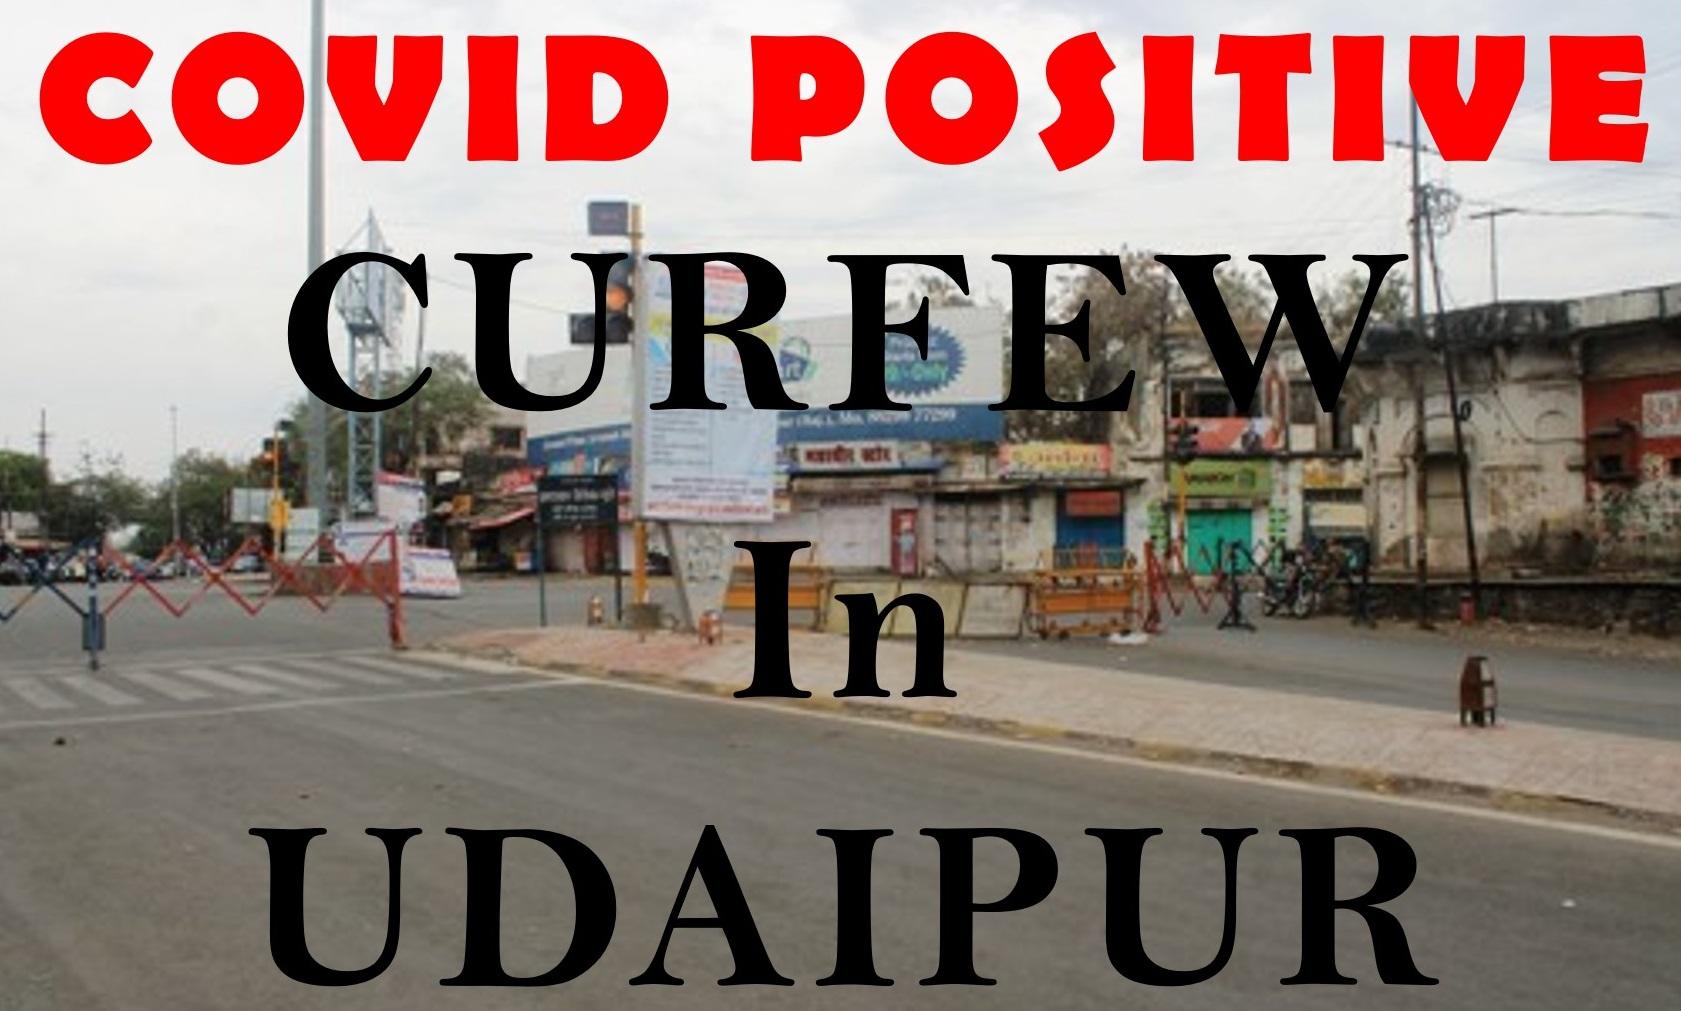 CURFEW imposed in parts of Udaipur | First Corona Positive Case calls for Proactive action